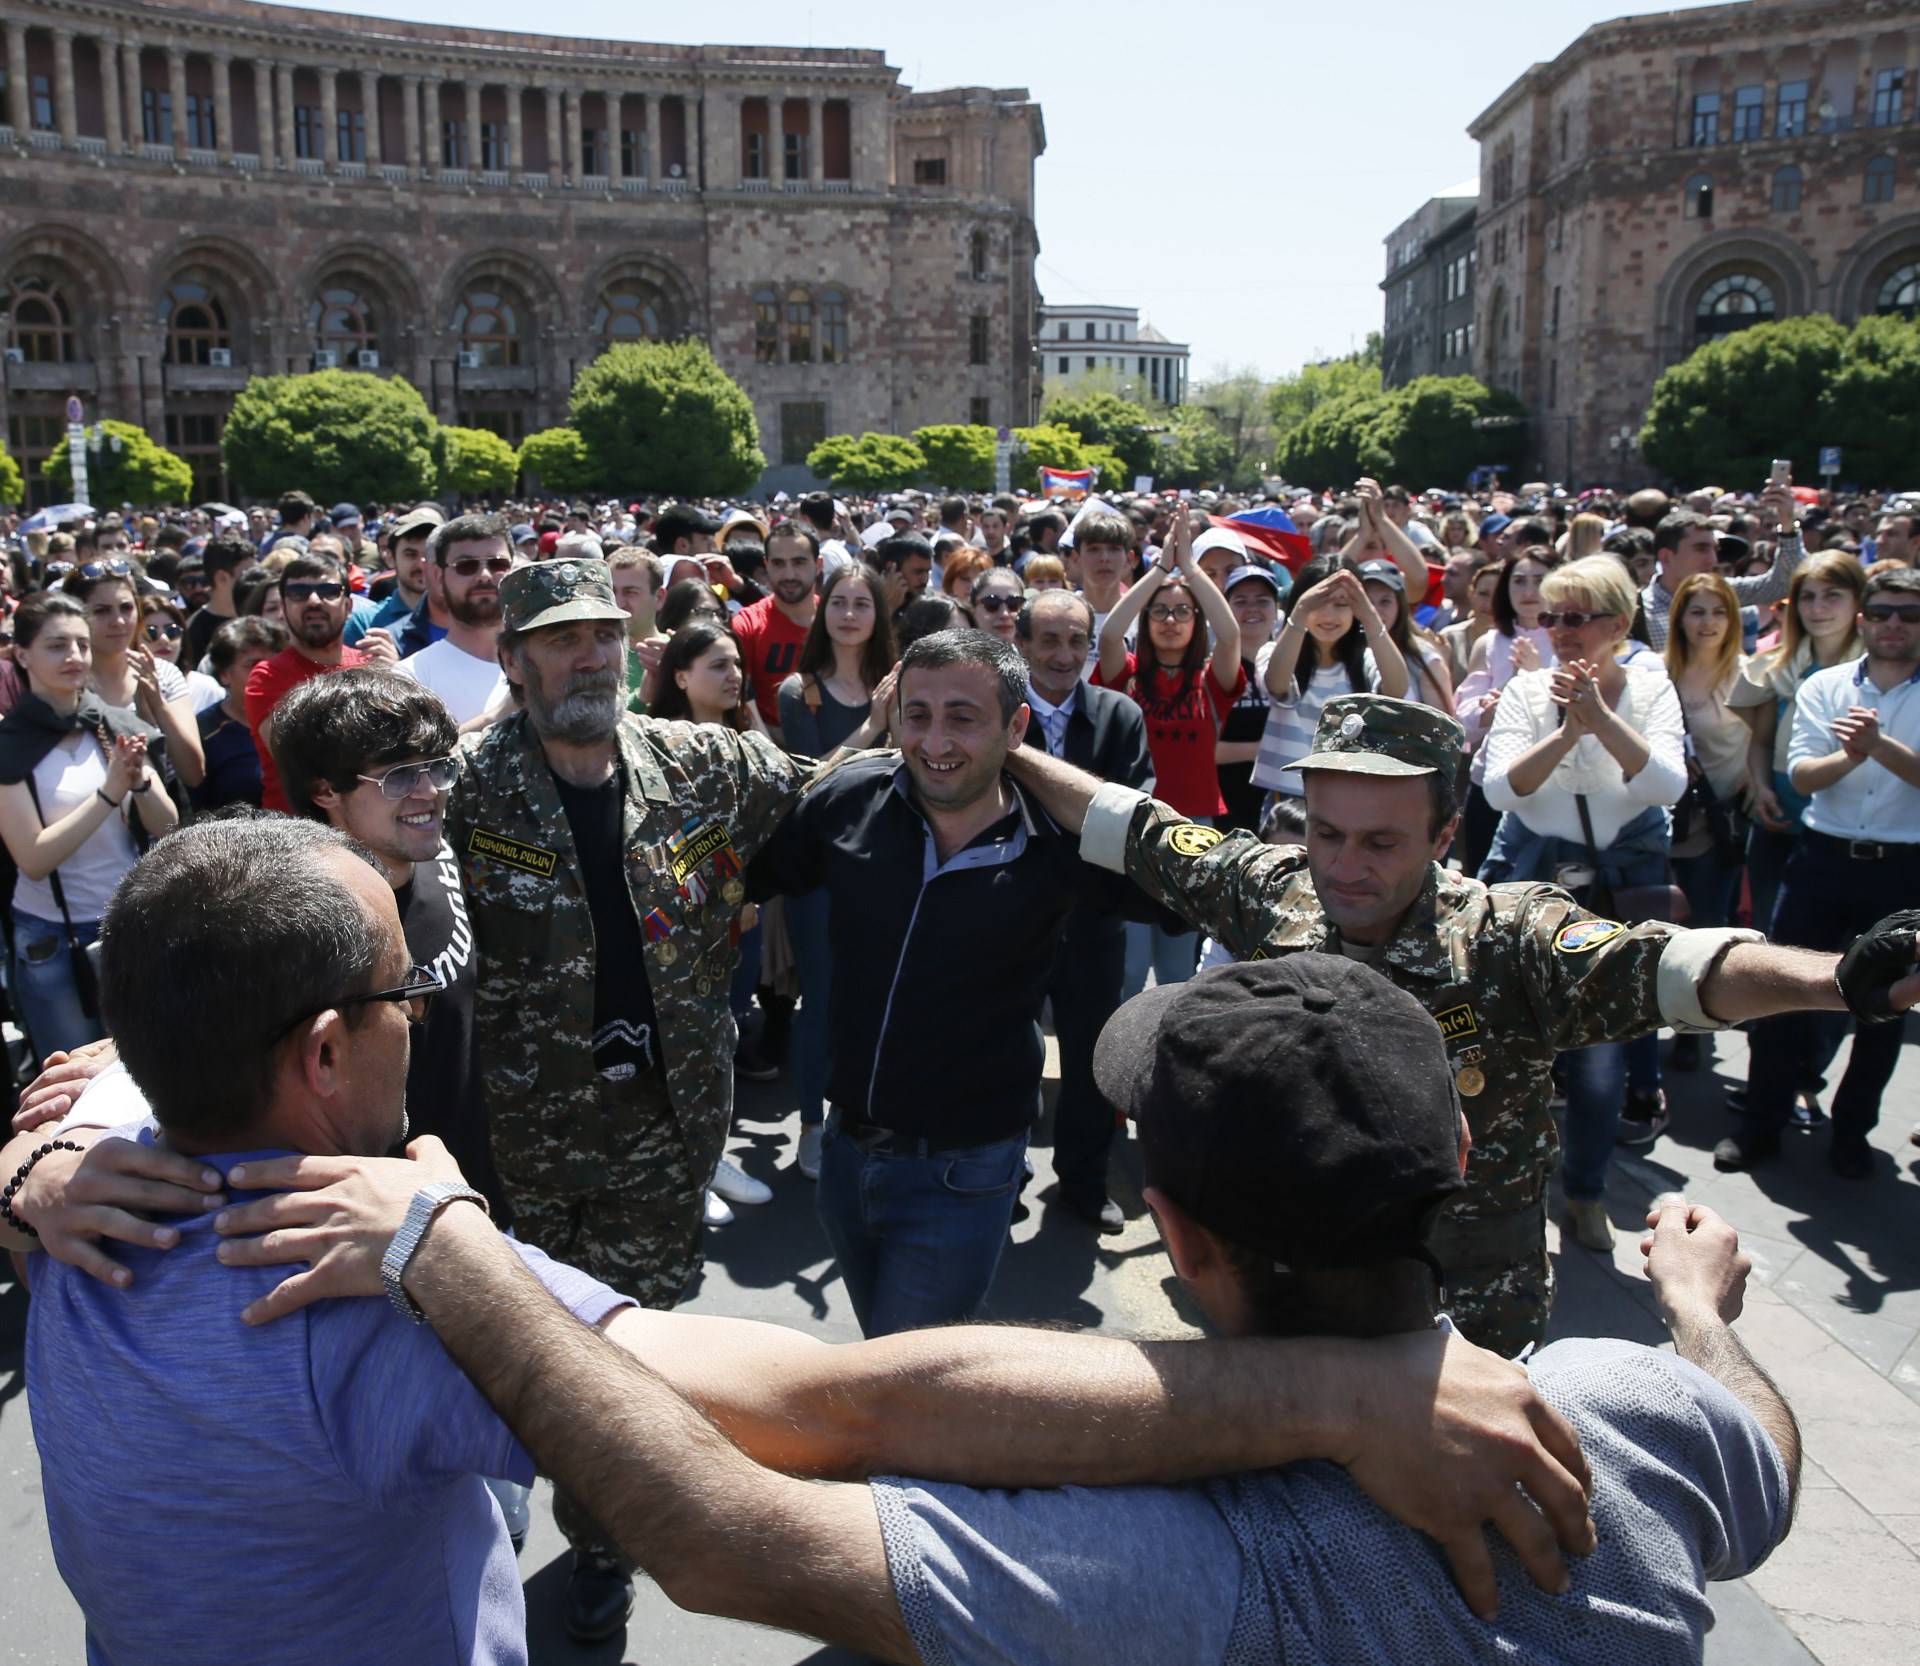 Armenian opposition supporters dance on the street after protest movement leader Nikol Pashinyan announced a nationwide campaign of civil disobedience in Yerevan